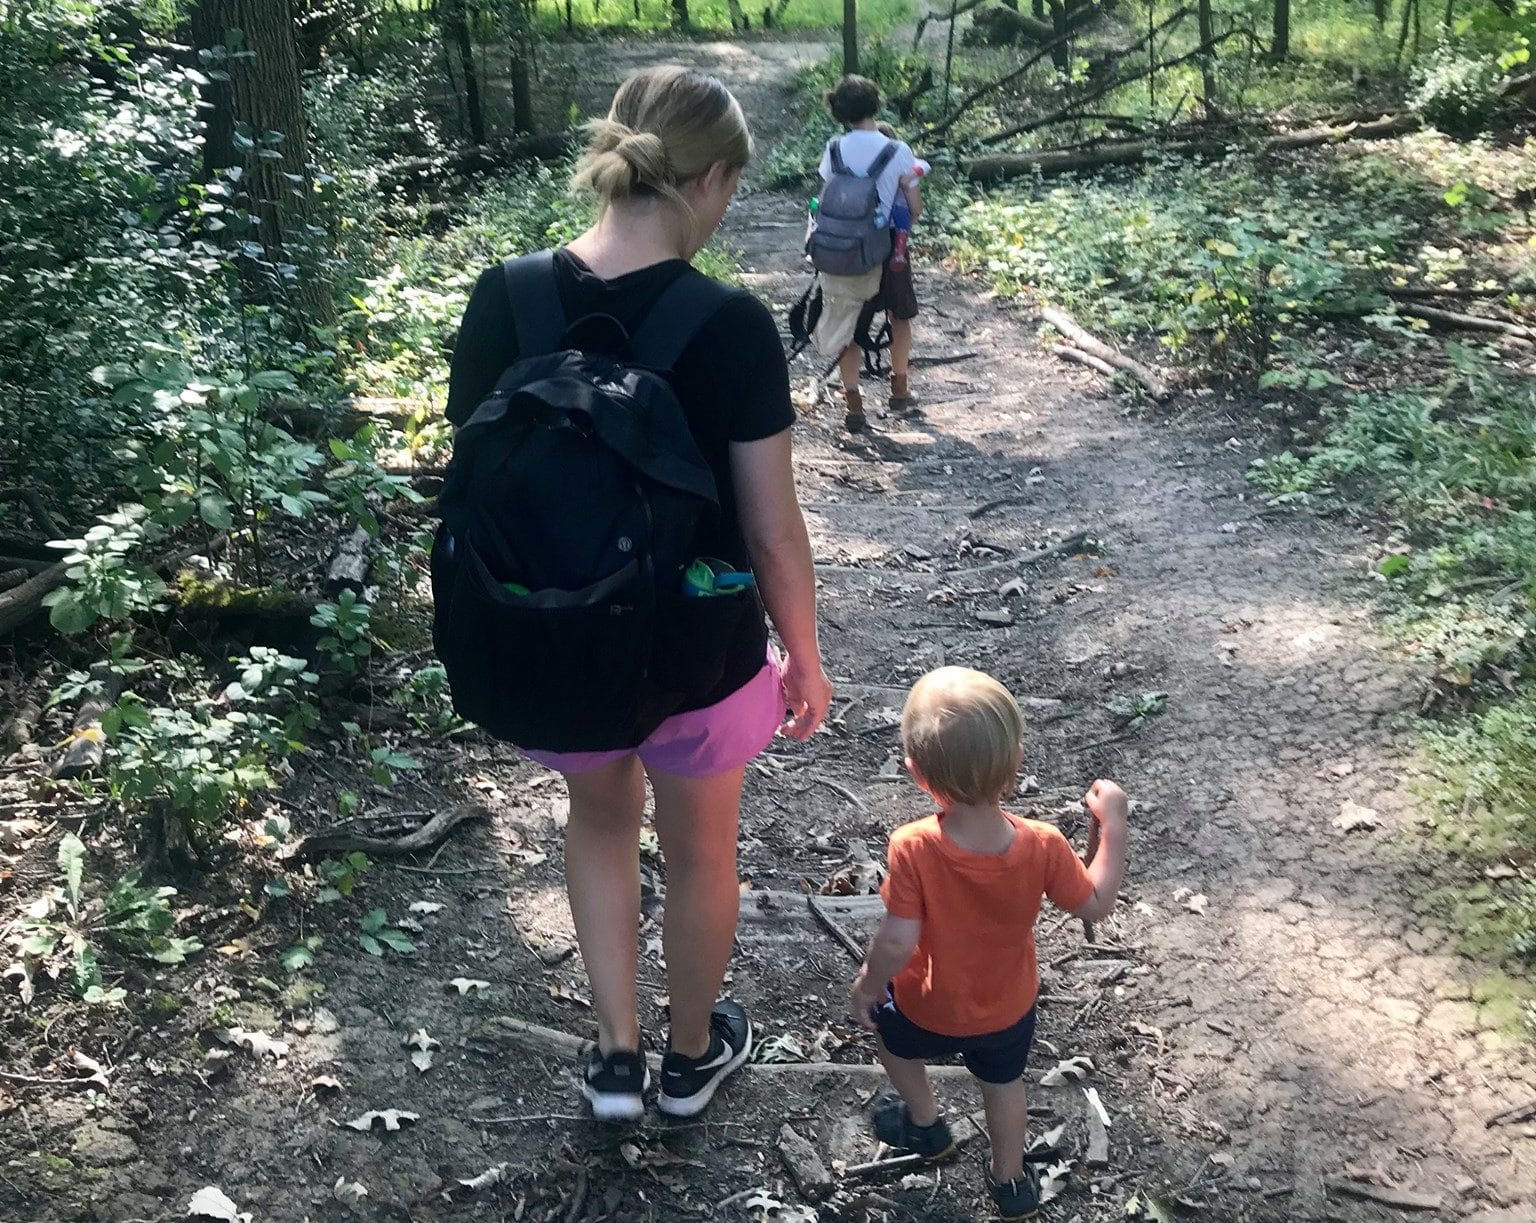 A mother and child in the foreground and a mother and child in the background hike down a woodland trail as part of nature exploration in our Child in the Wild Playgroup.